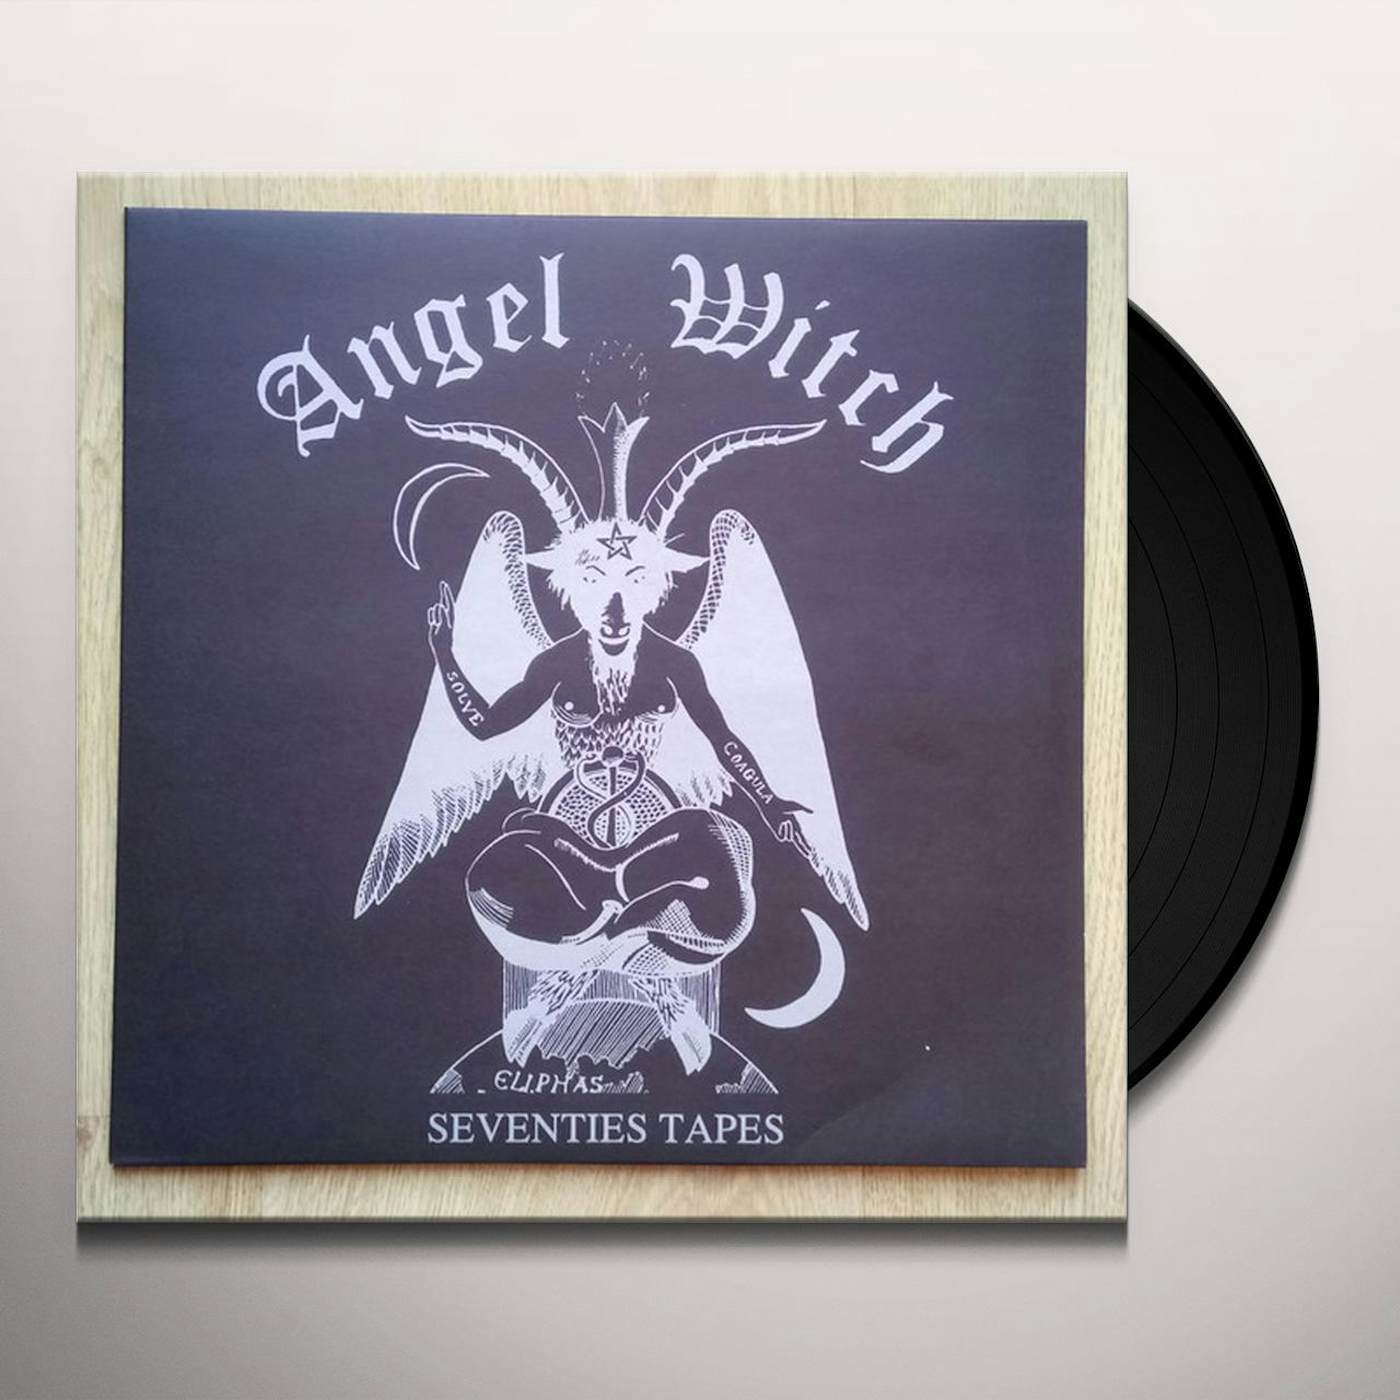 Angel Witch Seventies Tapes Vinyl Record